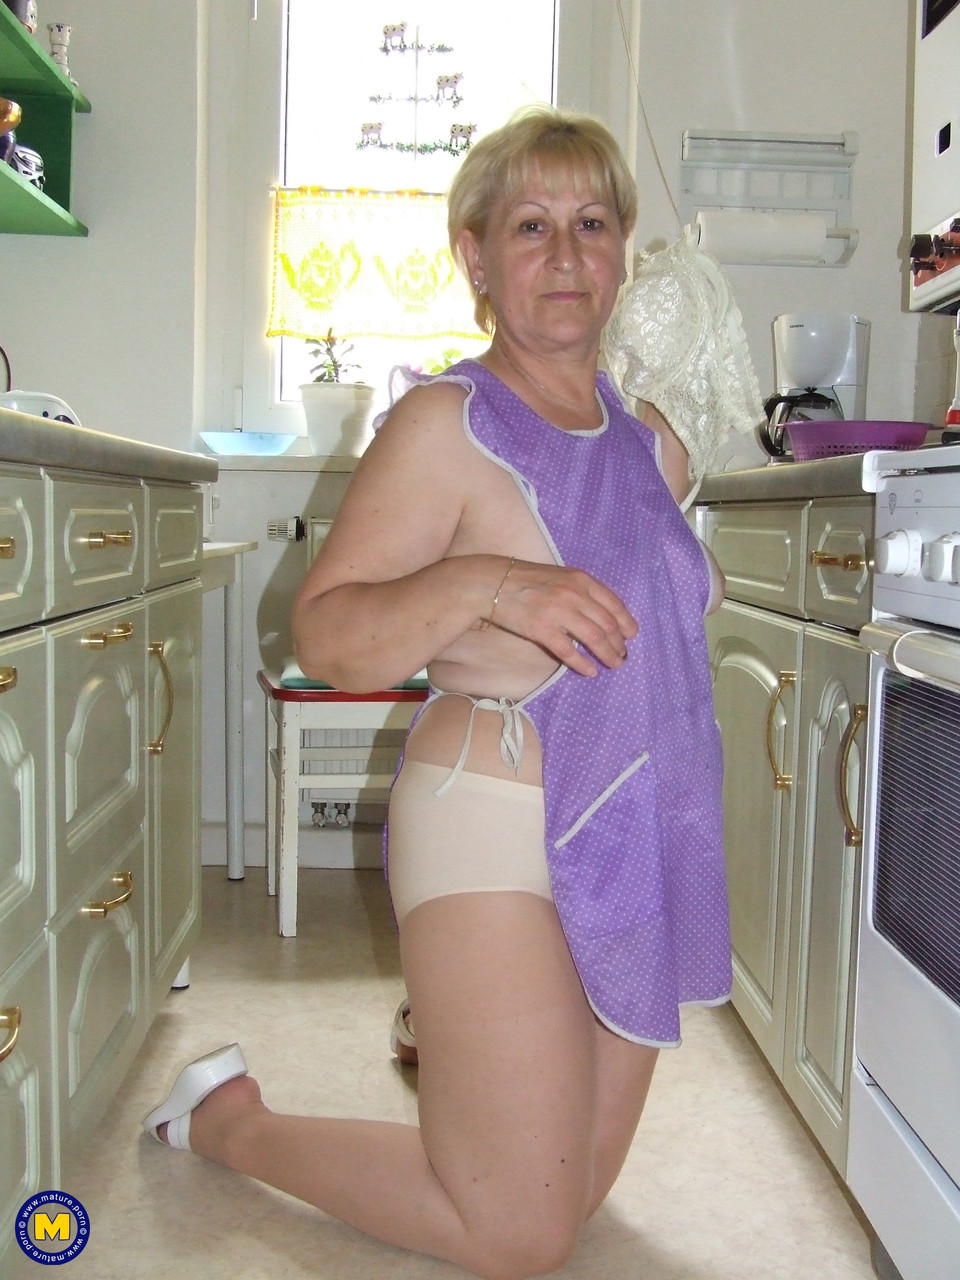 Short haired German cleaning lady Dagmar shows her mature cunt in the kitchen foto porno #425226963 | Mature NL Pics, Dagmar, German, porno ponsel